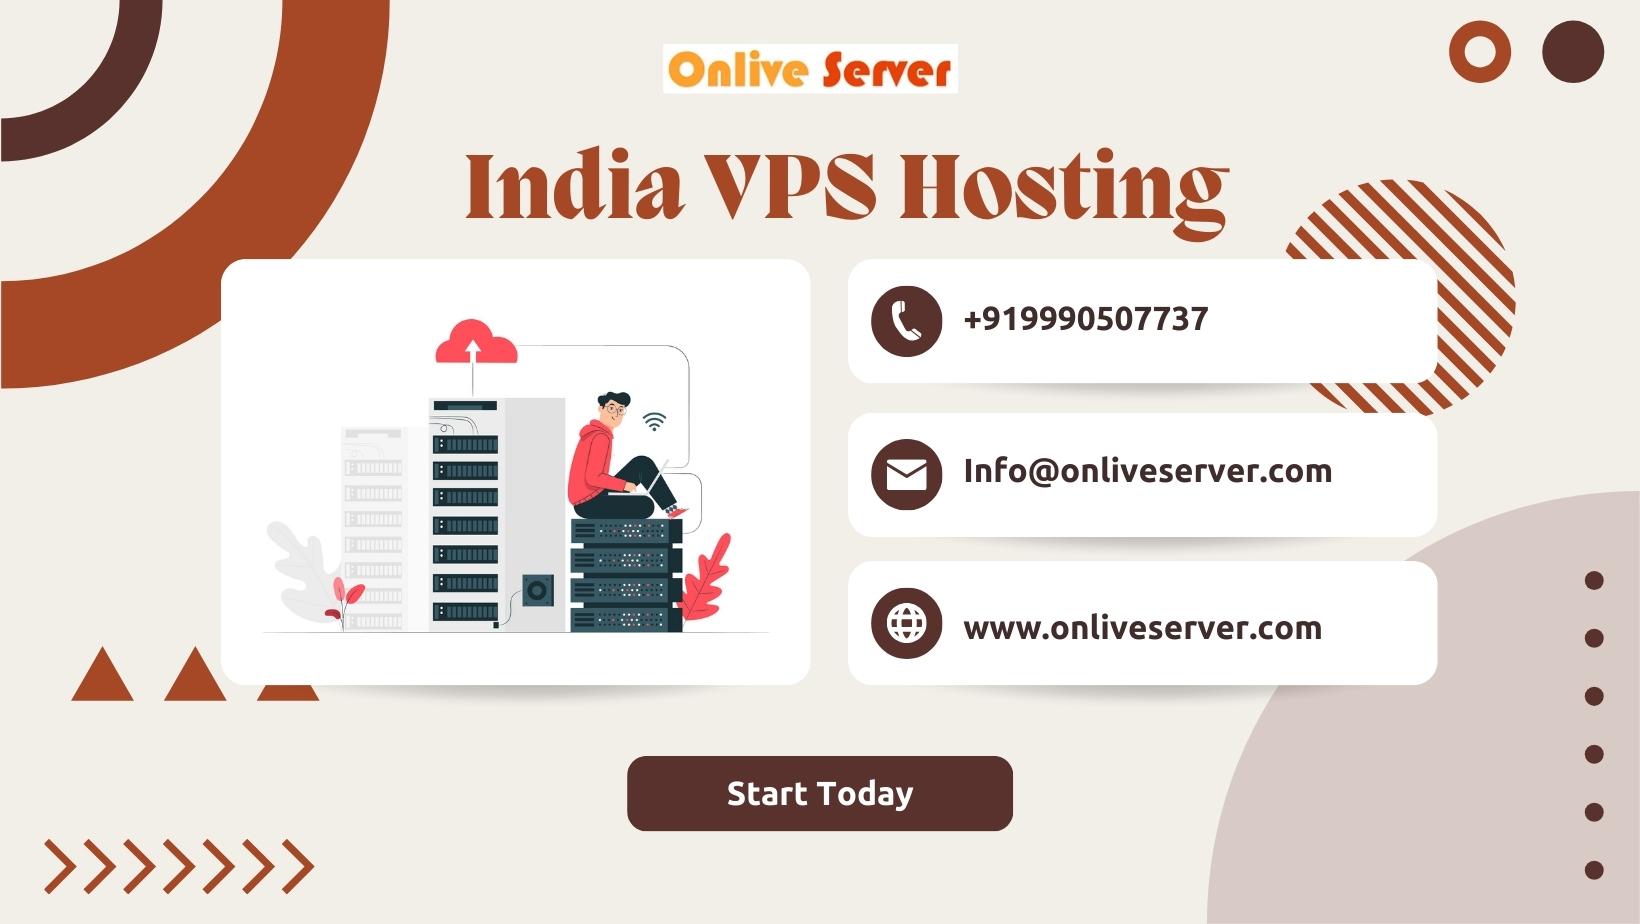 Experience Top-Notch Performance with India VPS Hosting